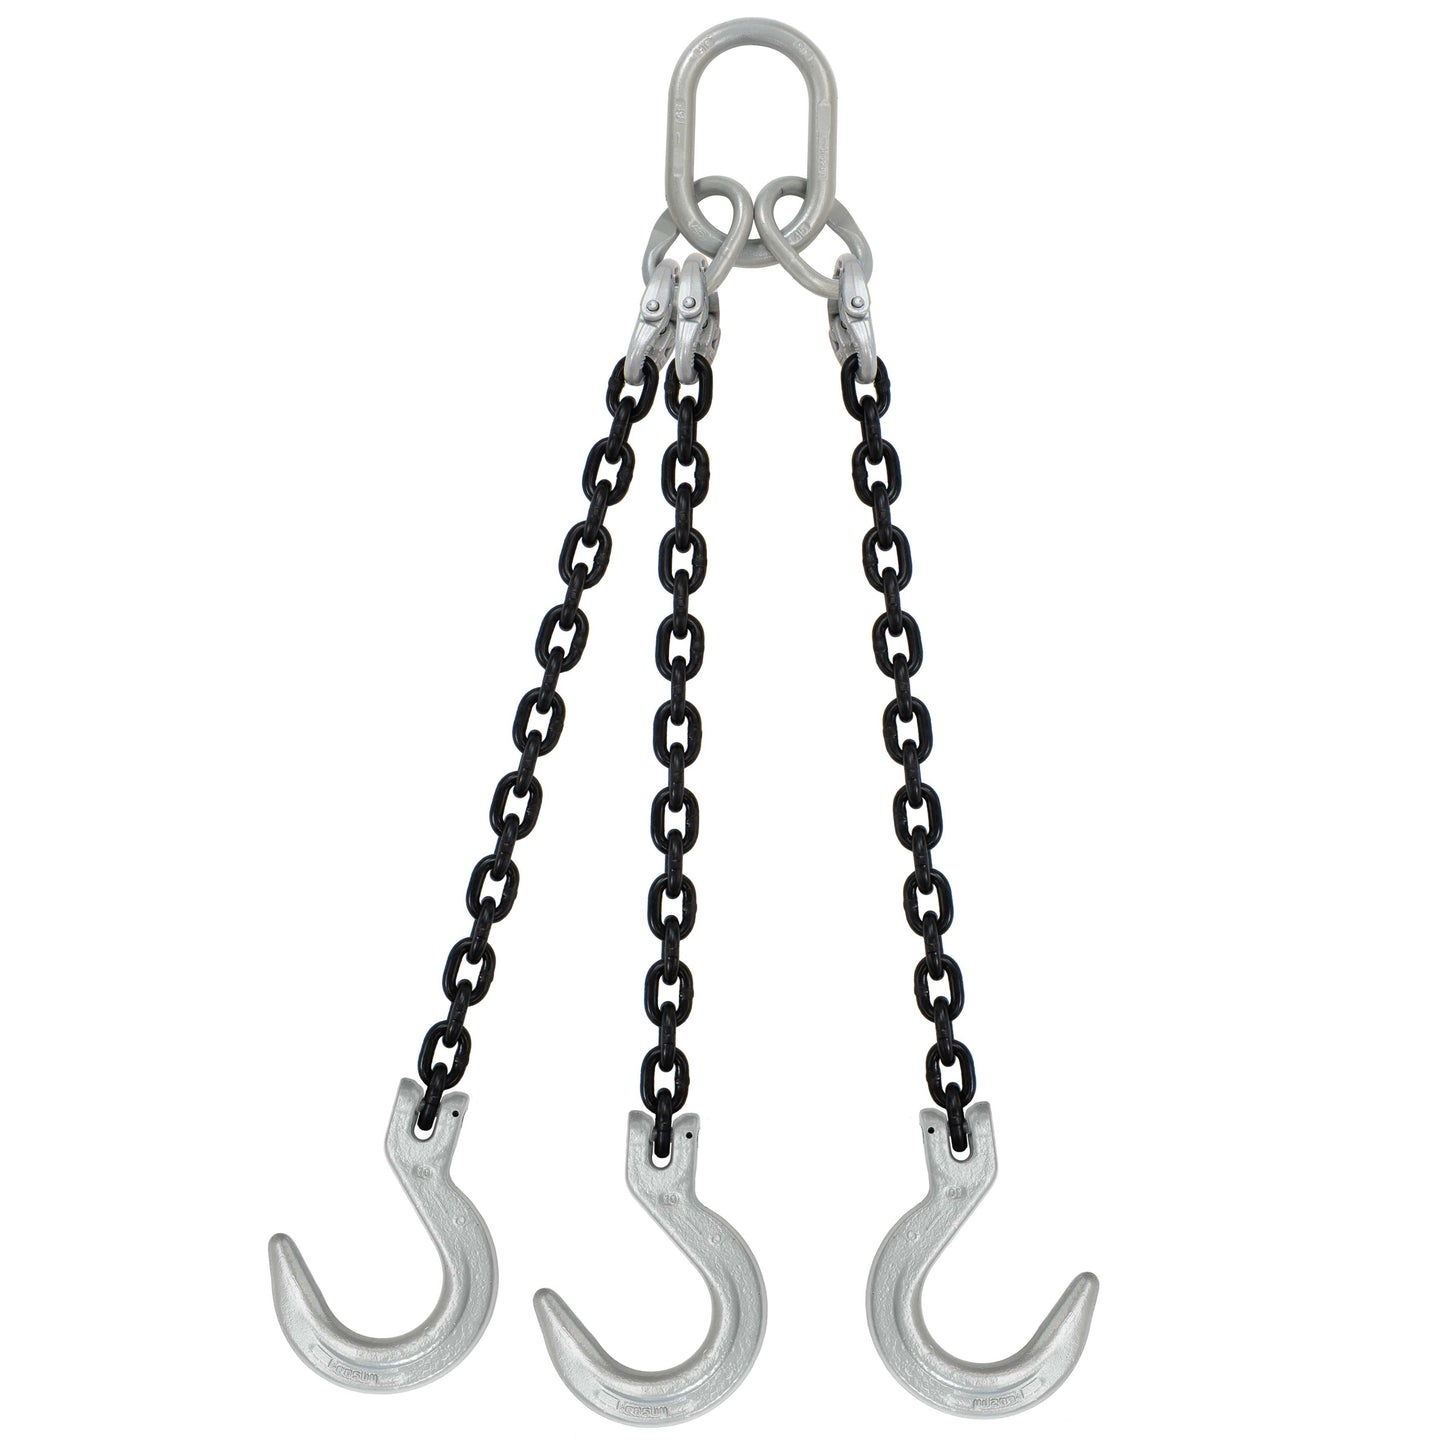 12 inch x 6 foot Domestic 3 Leg Chain Sling w Crosby Foundry Hooks Grade 100 image 1 of 2